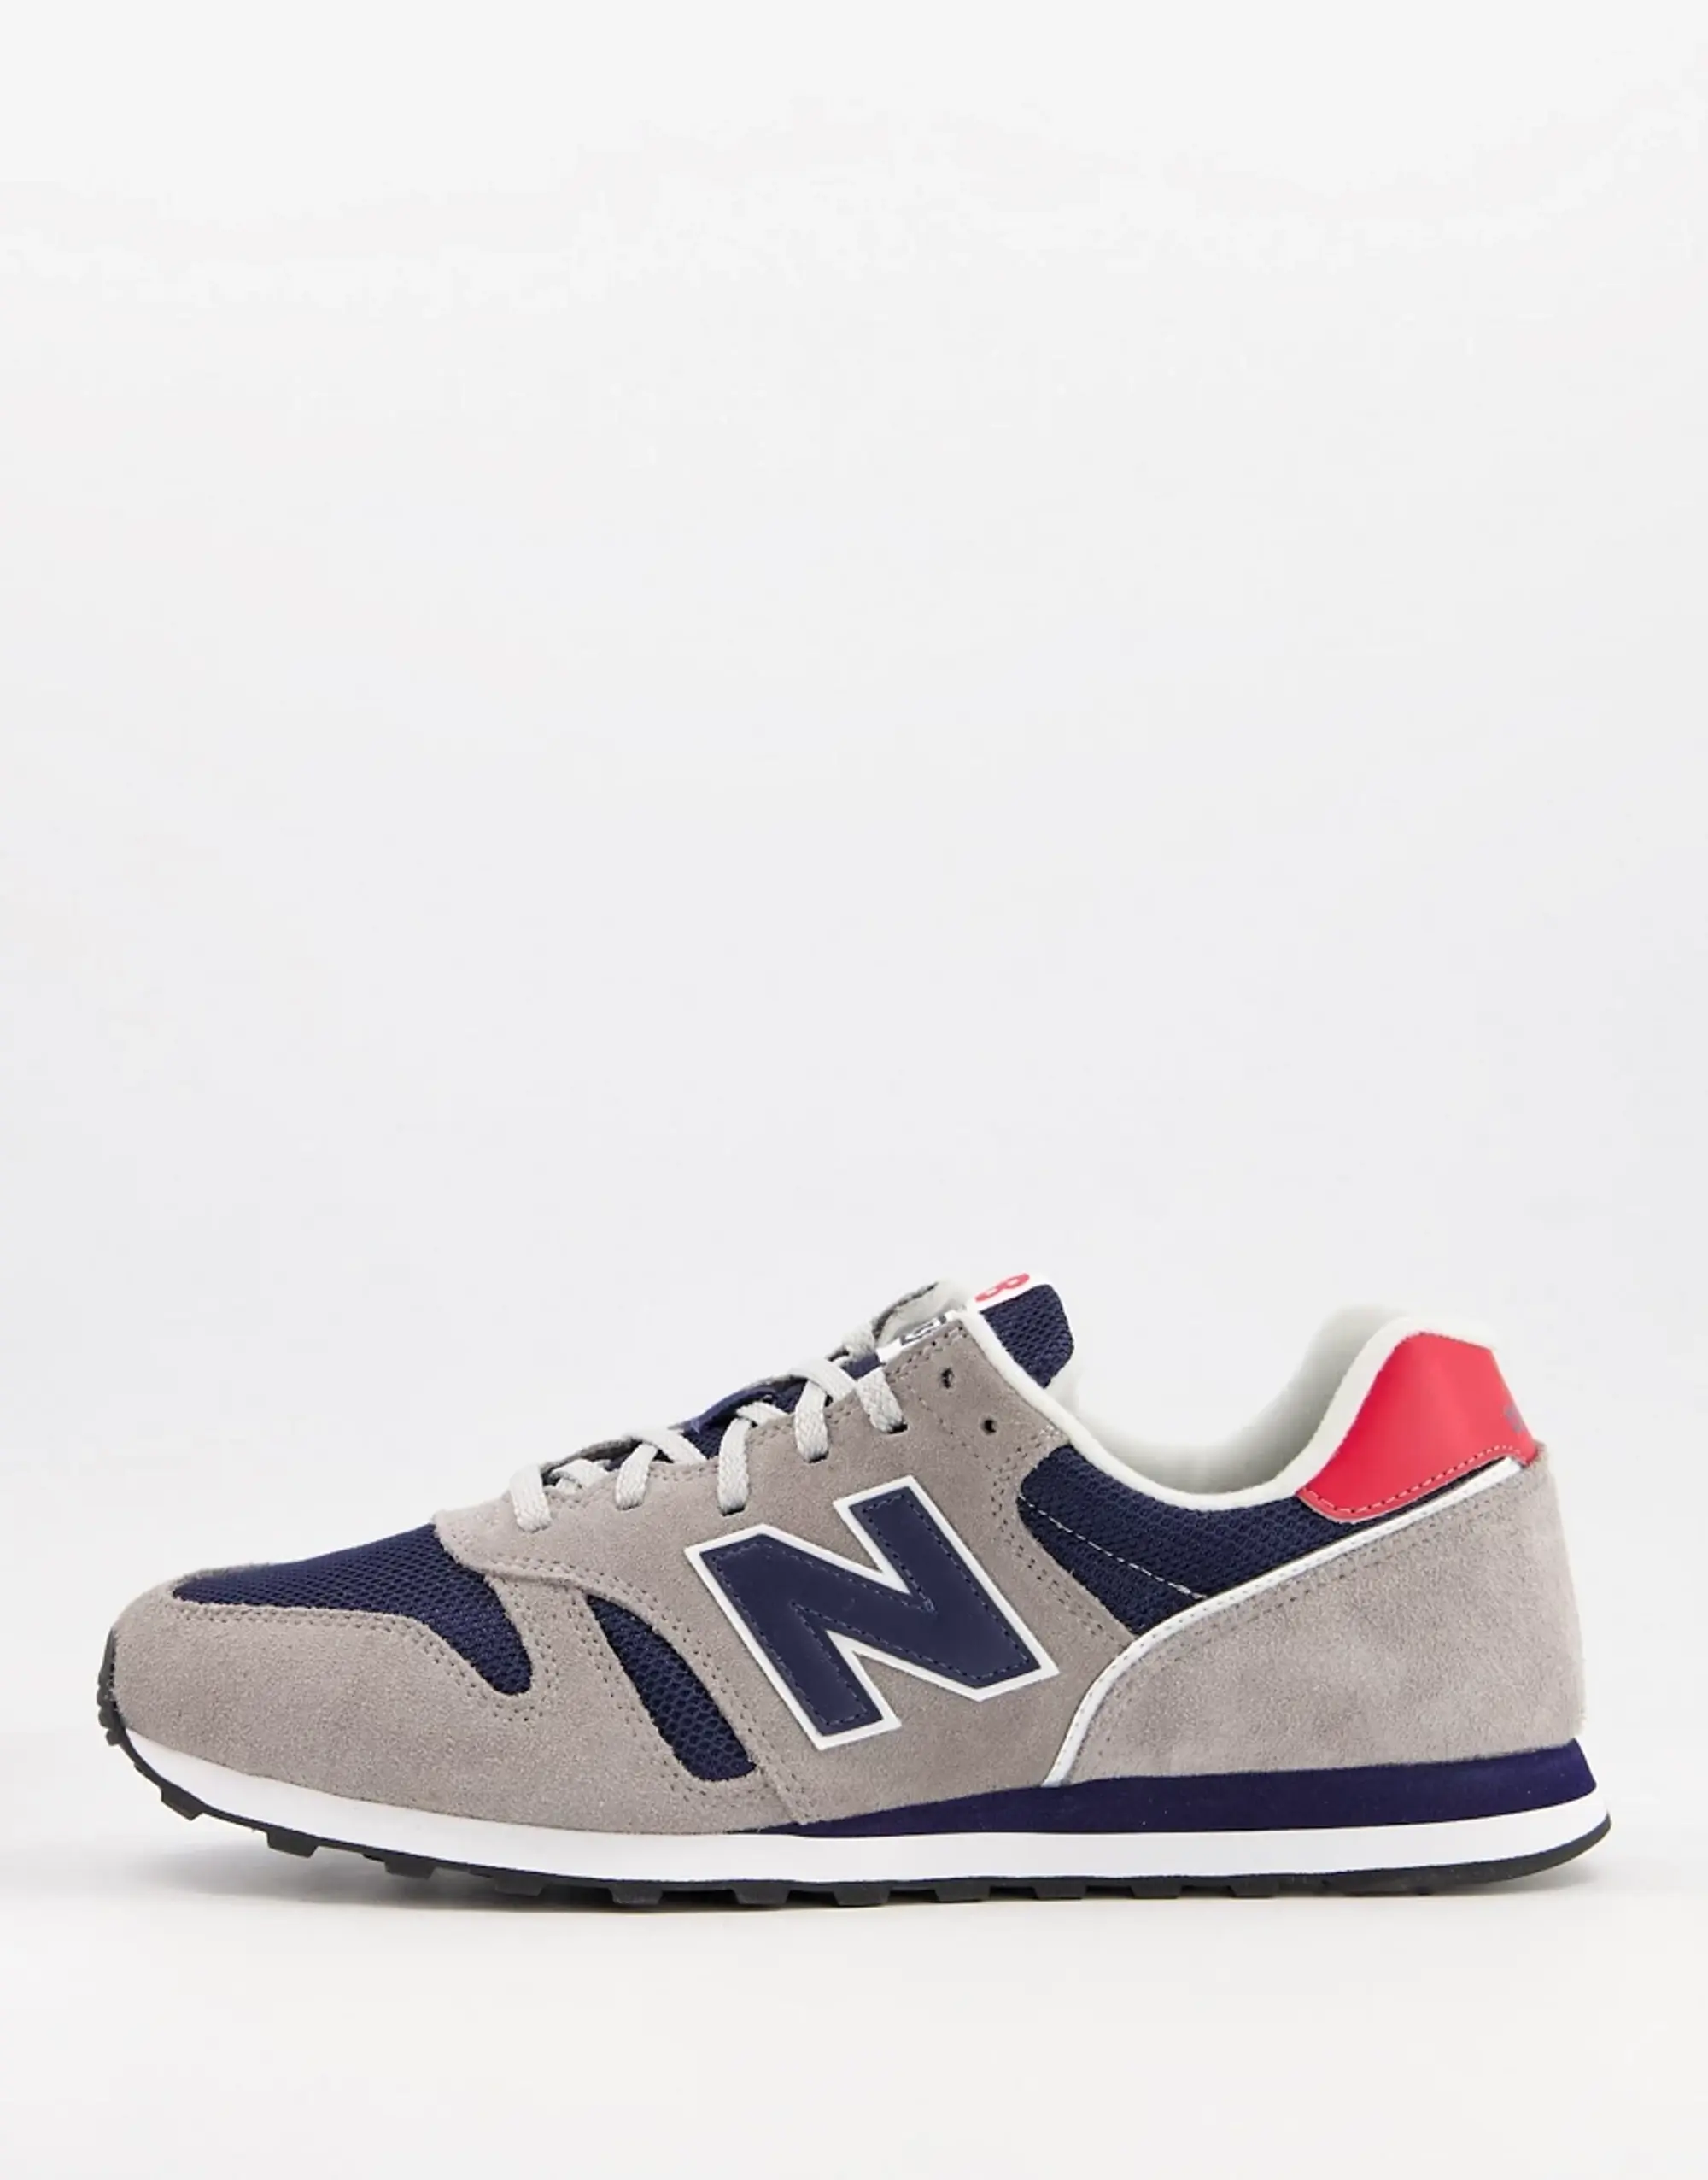 New Balance 373 Trainers In Grey And Navy